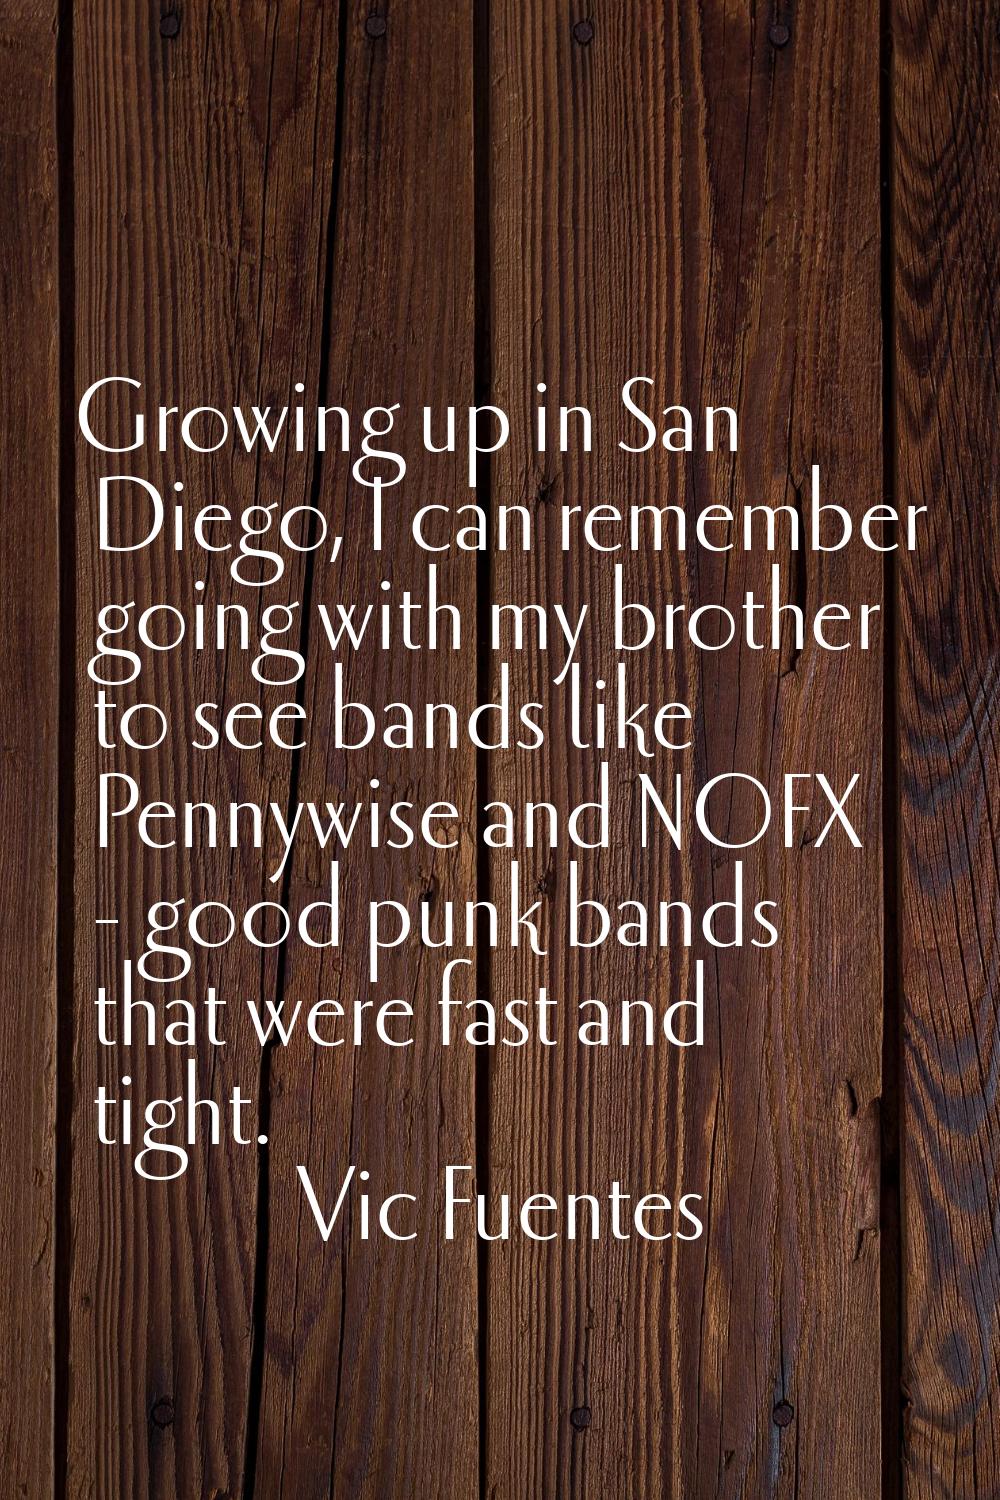 Growing up in San Diego, I can remember going with my brother to see bands like Pennywise and NOFX 